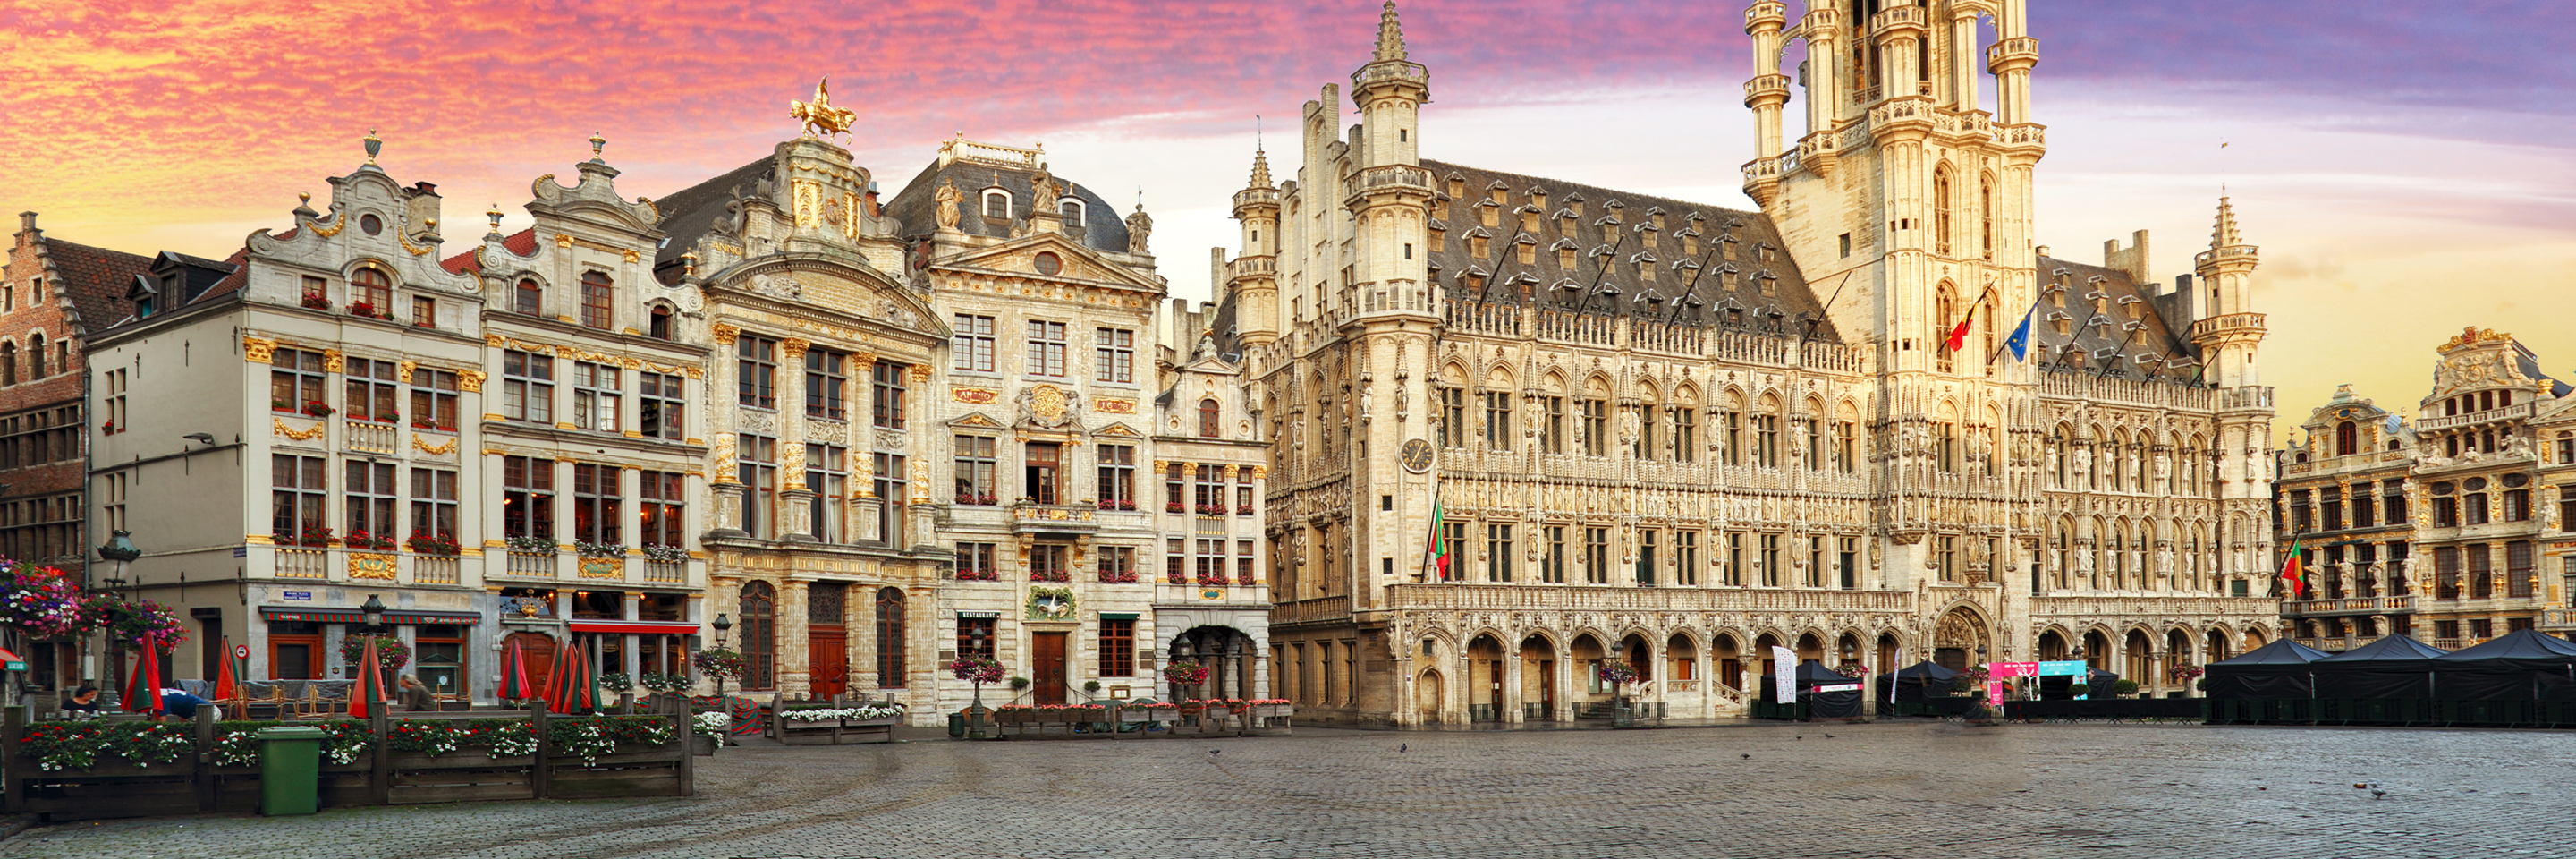 Tulip Time Highlights with 1 Night in Brussels